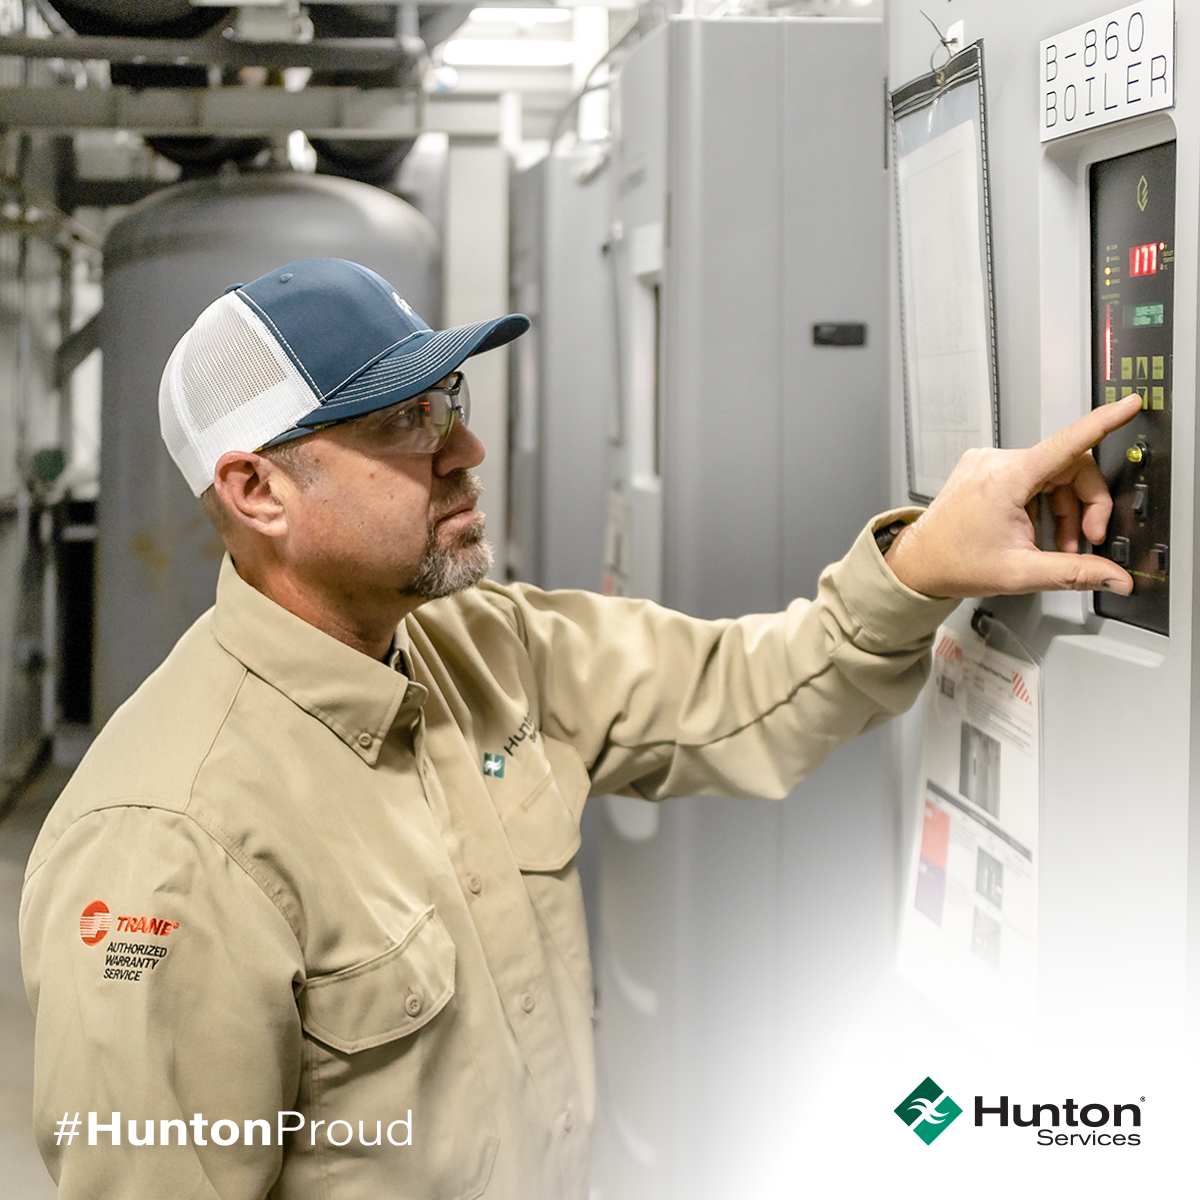 We understand how crucial preventative maintenance is to maximizing efficiency over the lifetime of your boilers. To see how we can help maximize efficiency at your facility, visit us online at HuntonServices.com 

#facilities #maintenance #commercialservices #huntonproud